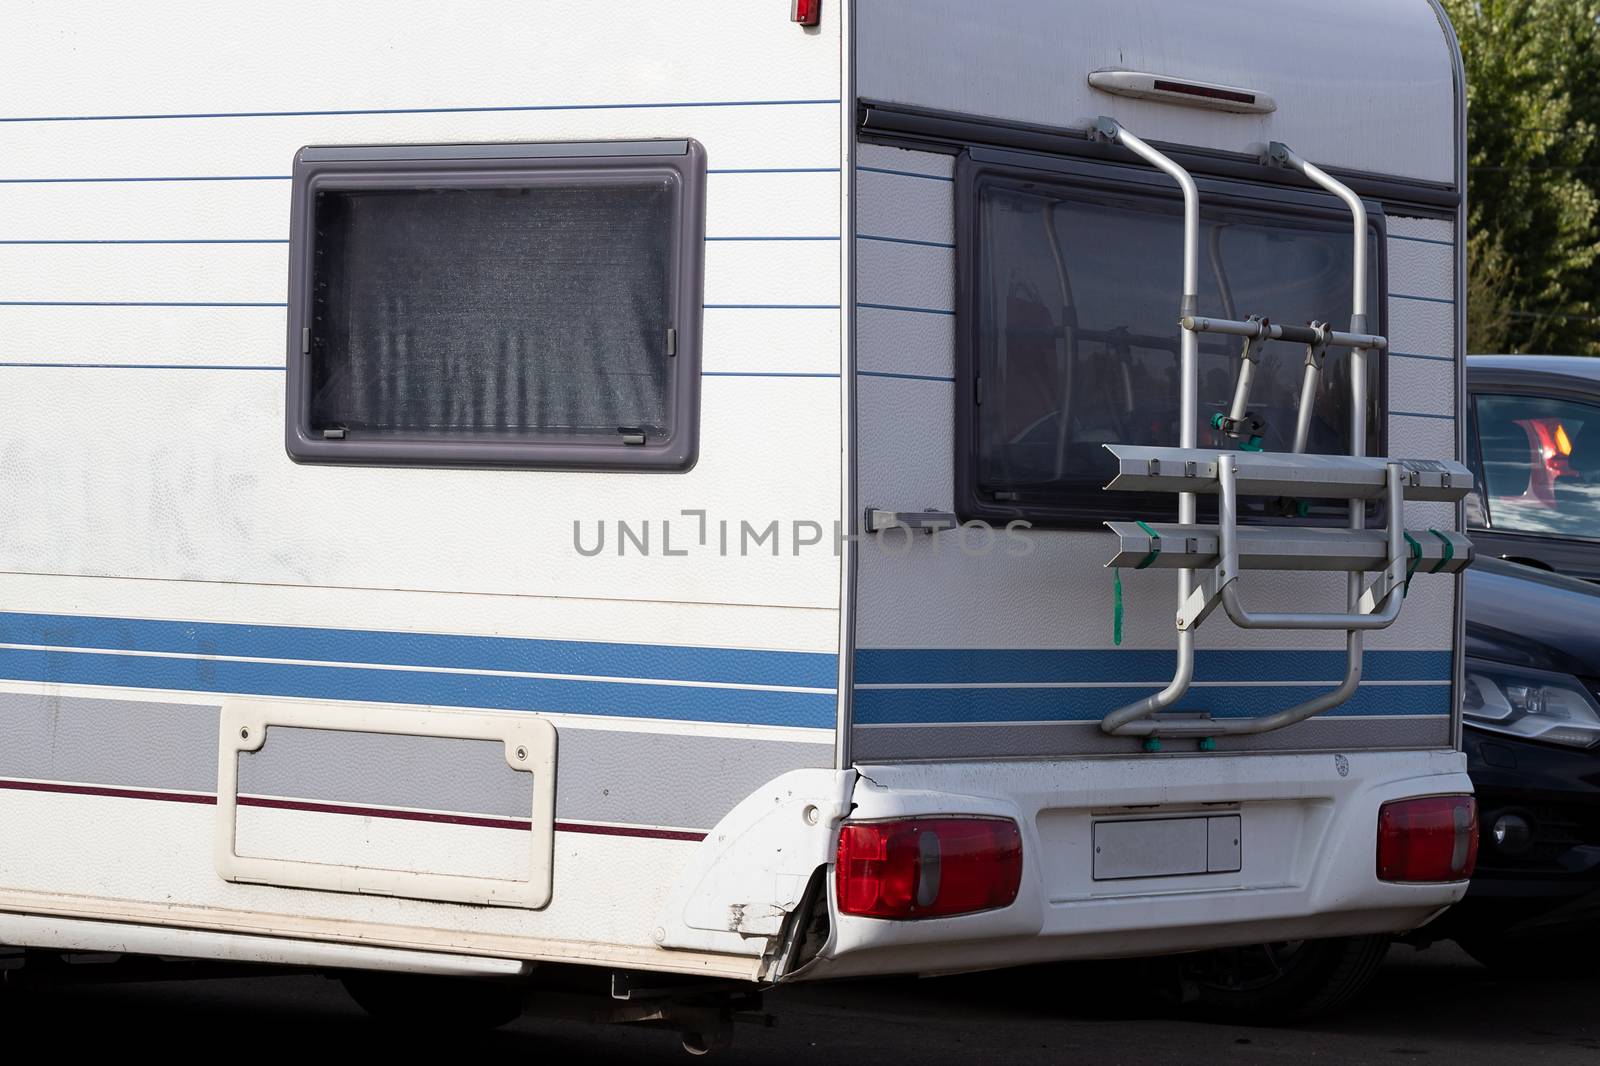 Caravan trailer, mobile home for family travel, close-up. by bonilook